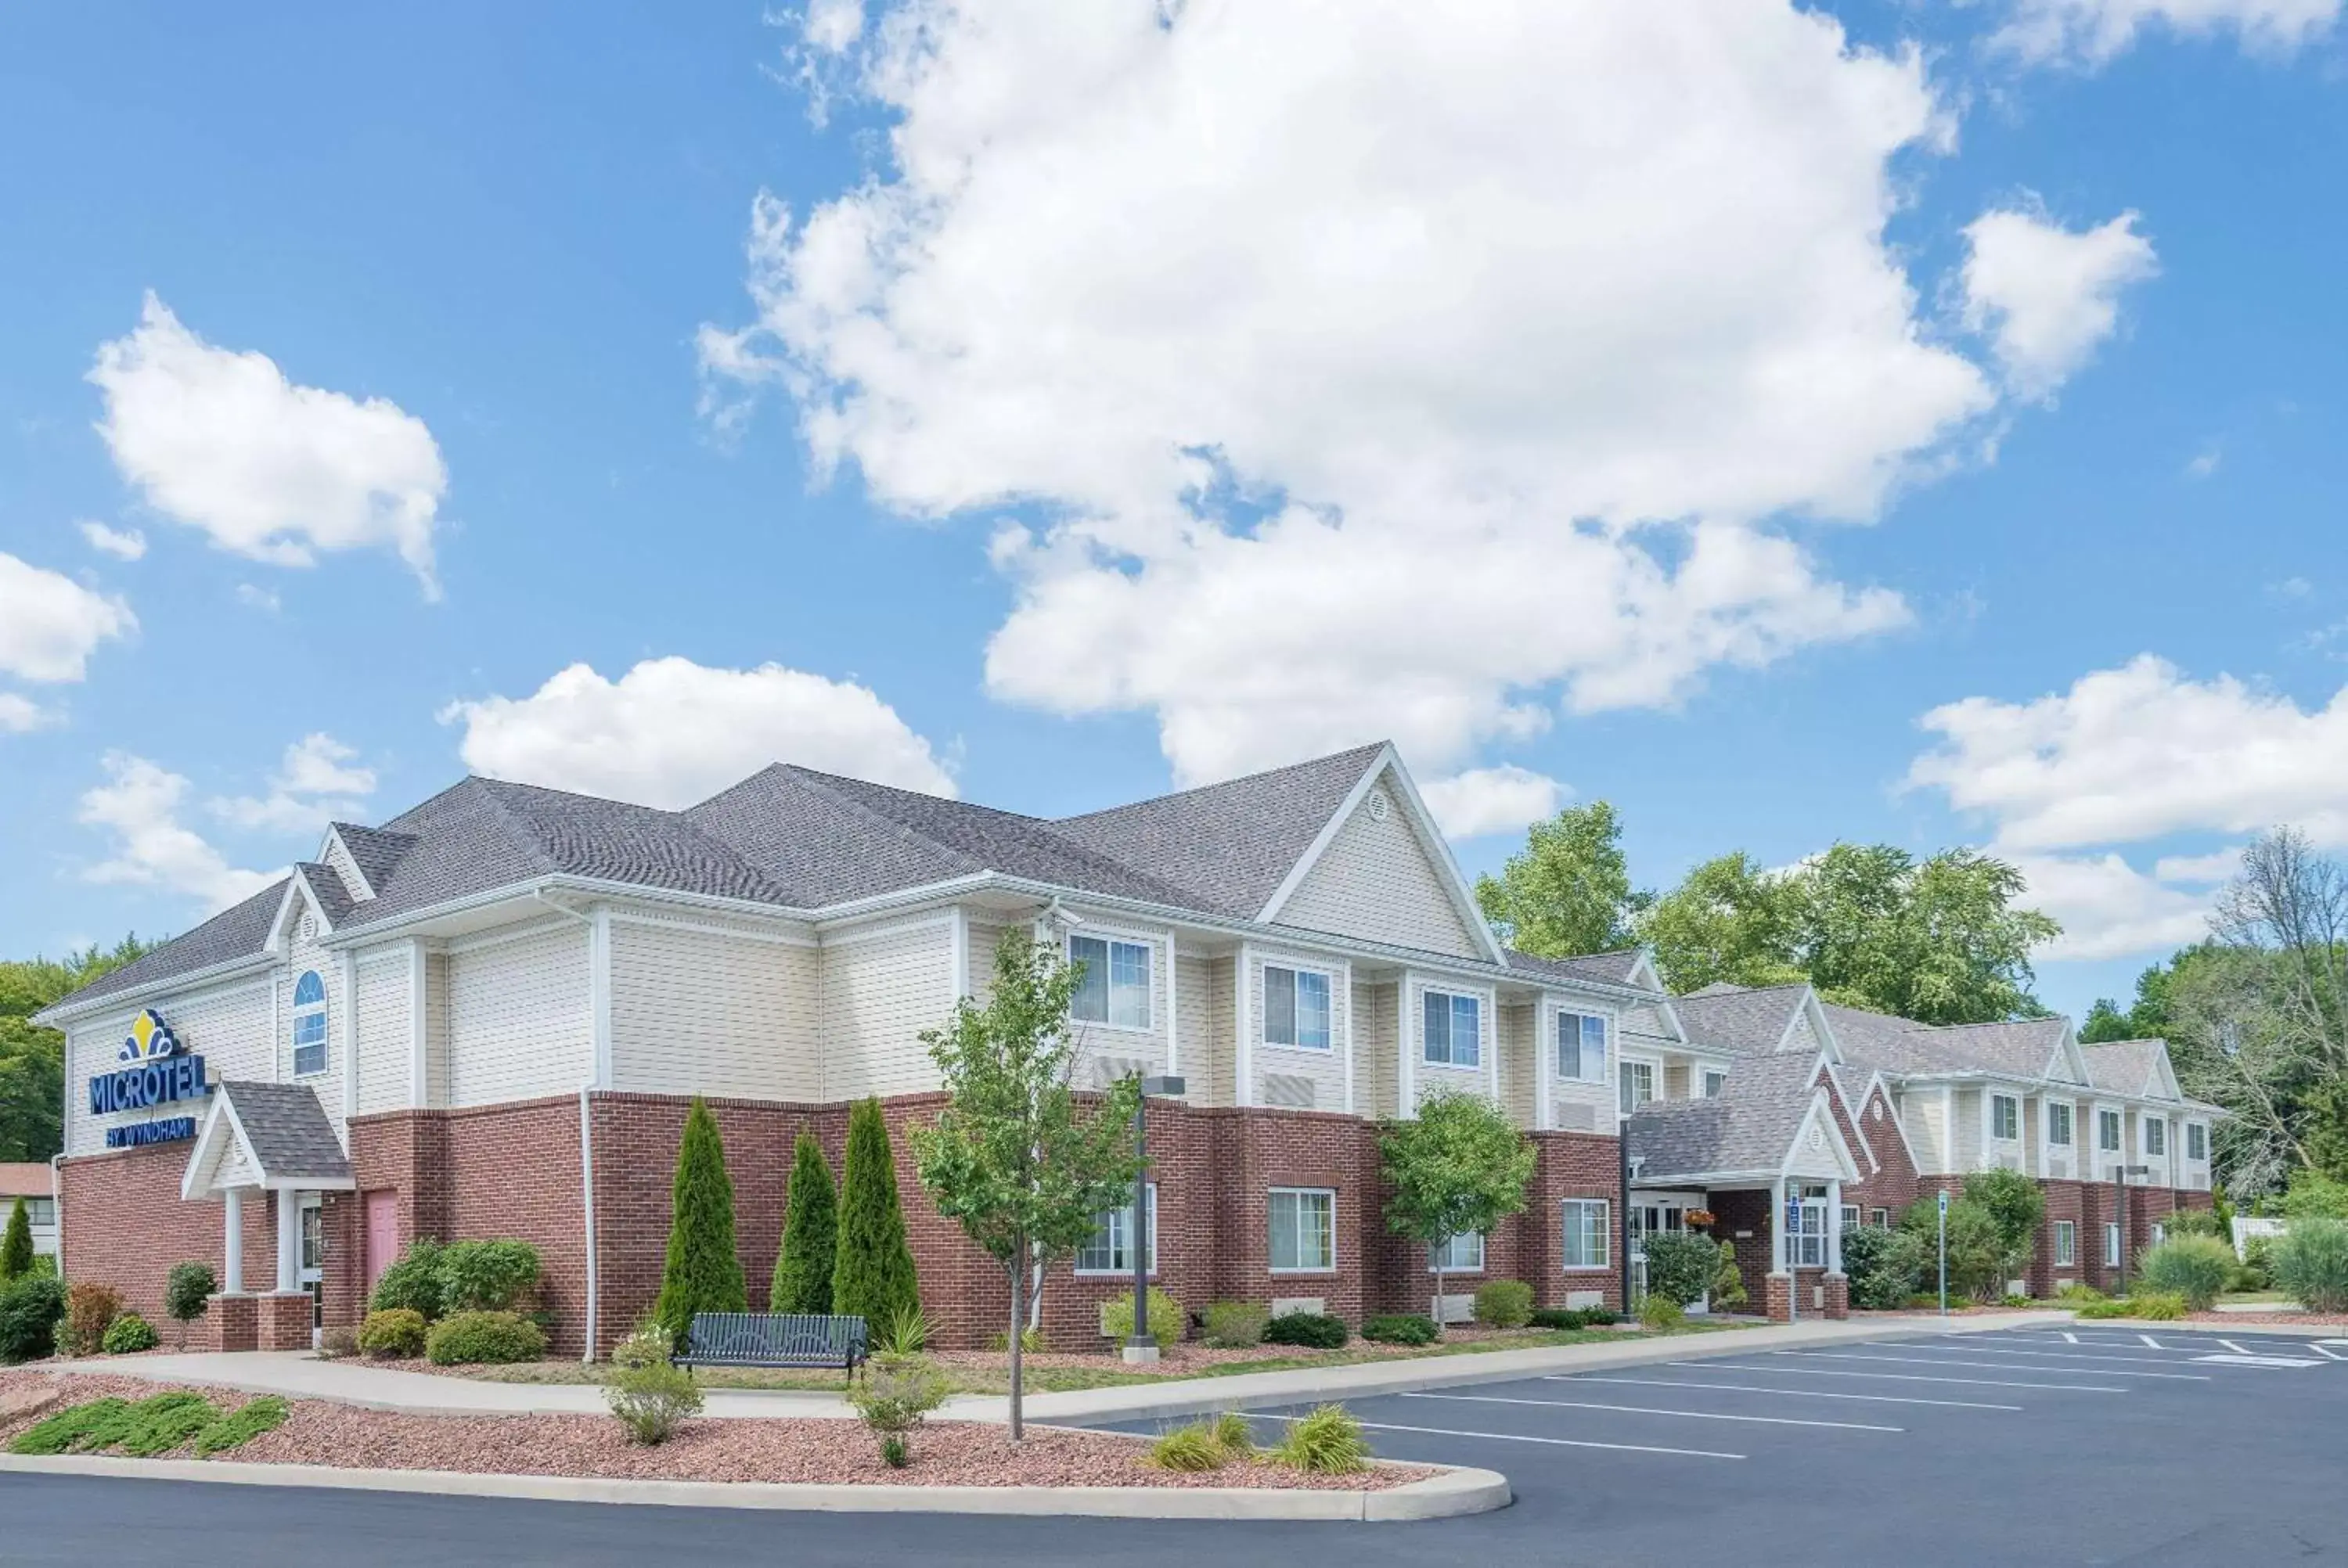 Property building in Microtel Inn & Suites Chili/Rochester